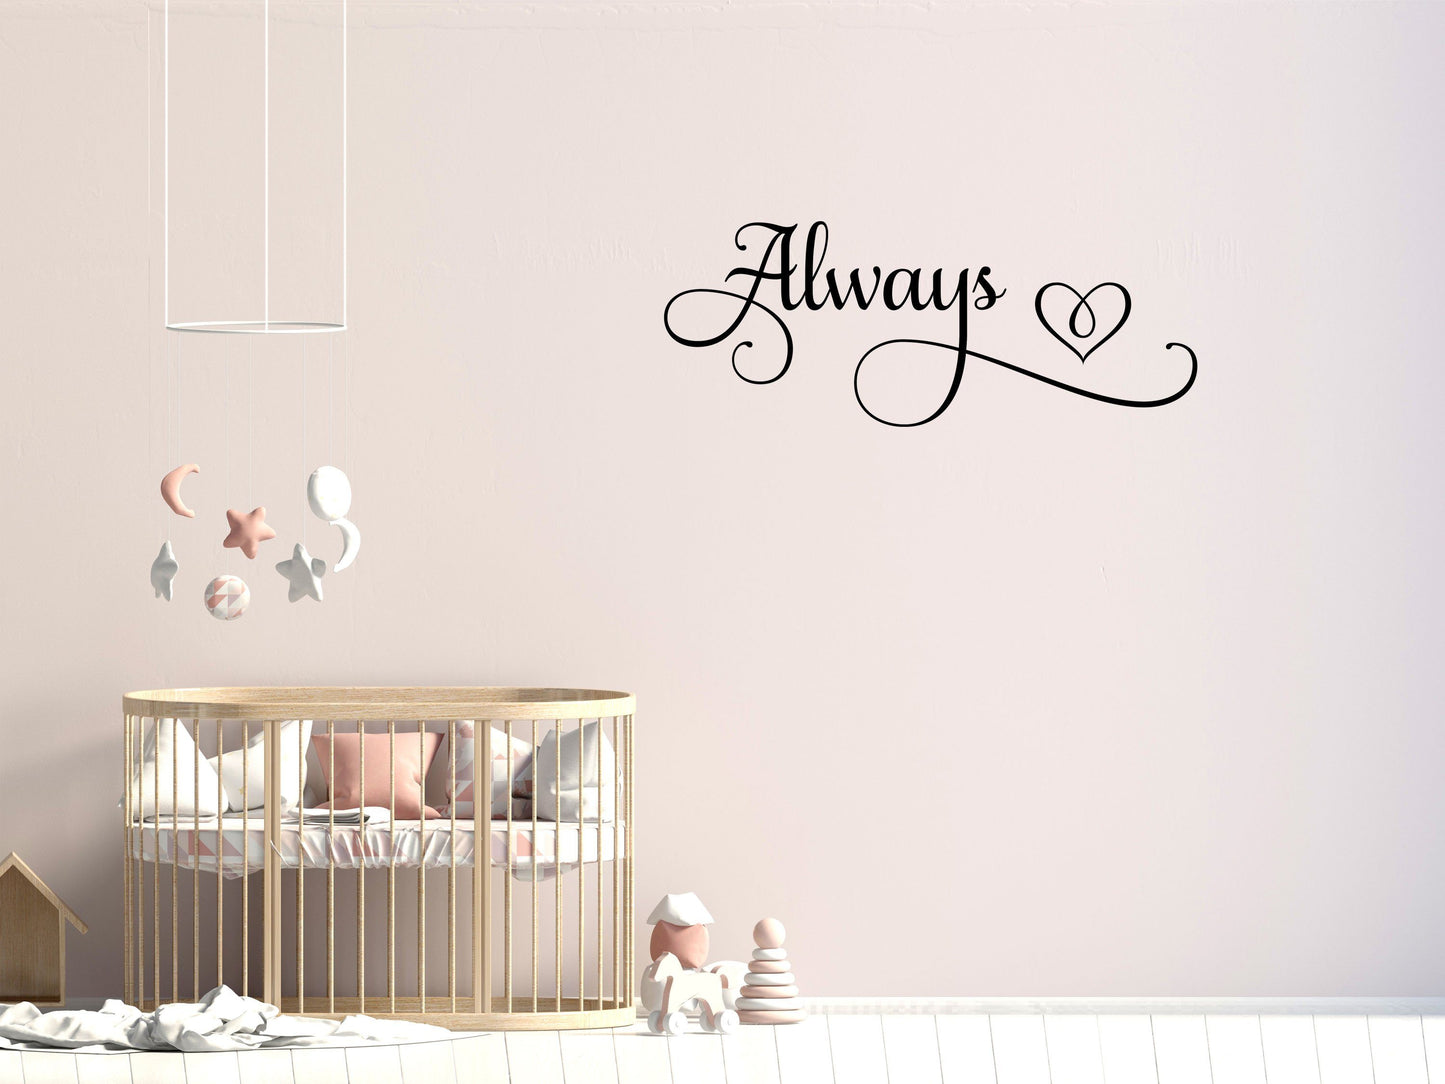 Always Sticker For The Wall Sticker - Inspirational Wall Decals Vinyl Wall Decal Done 